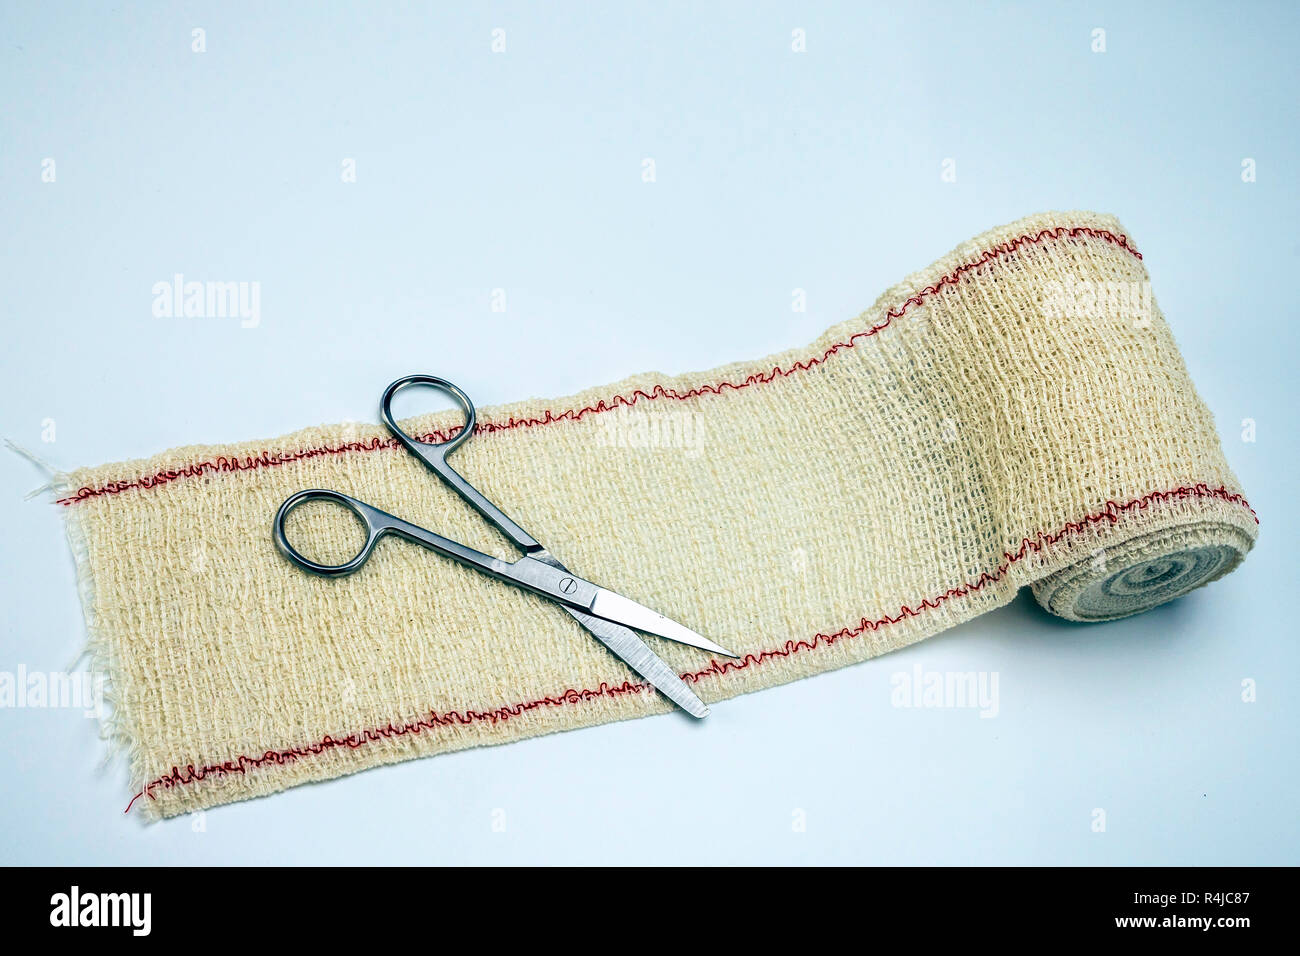 Surgical scissors on a bandage, conceptual image Stock Photo